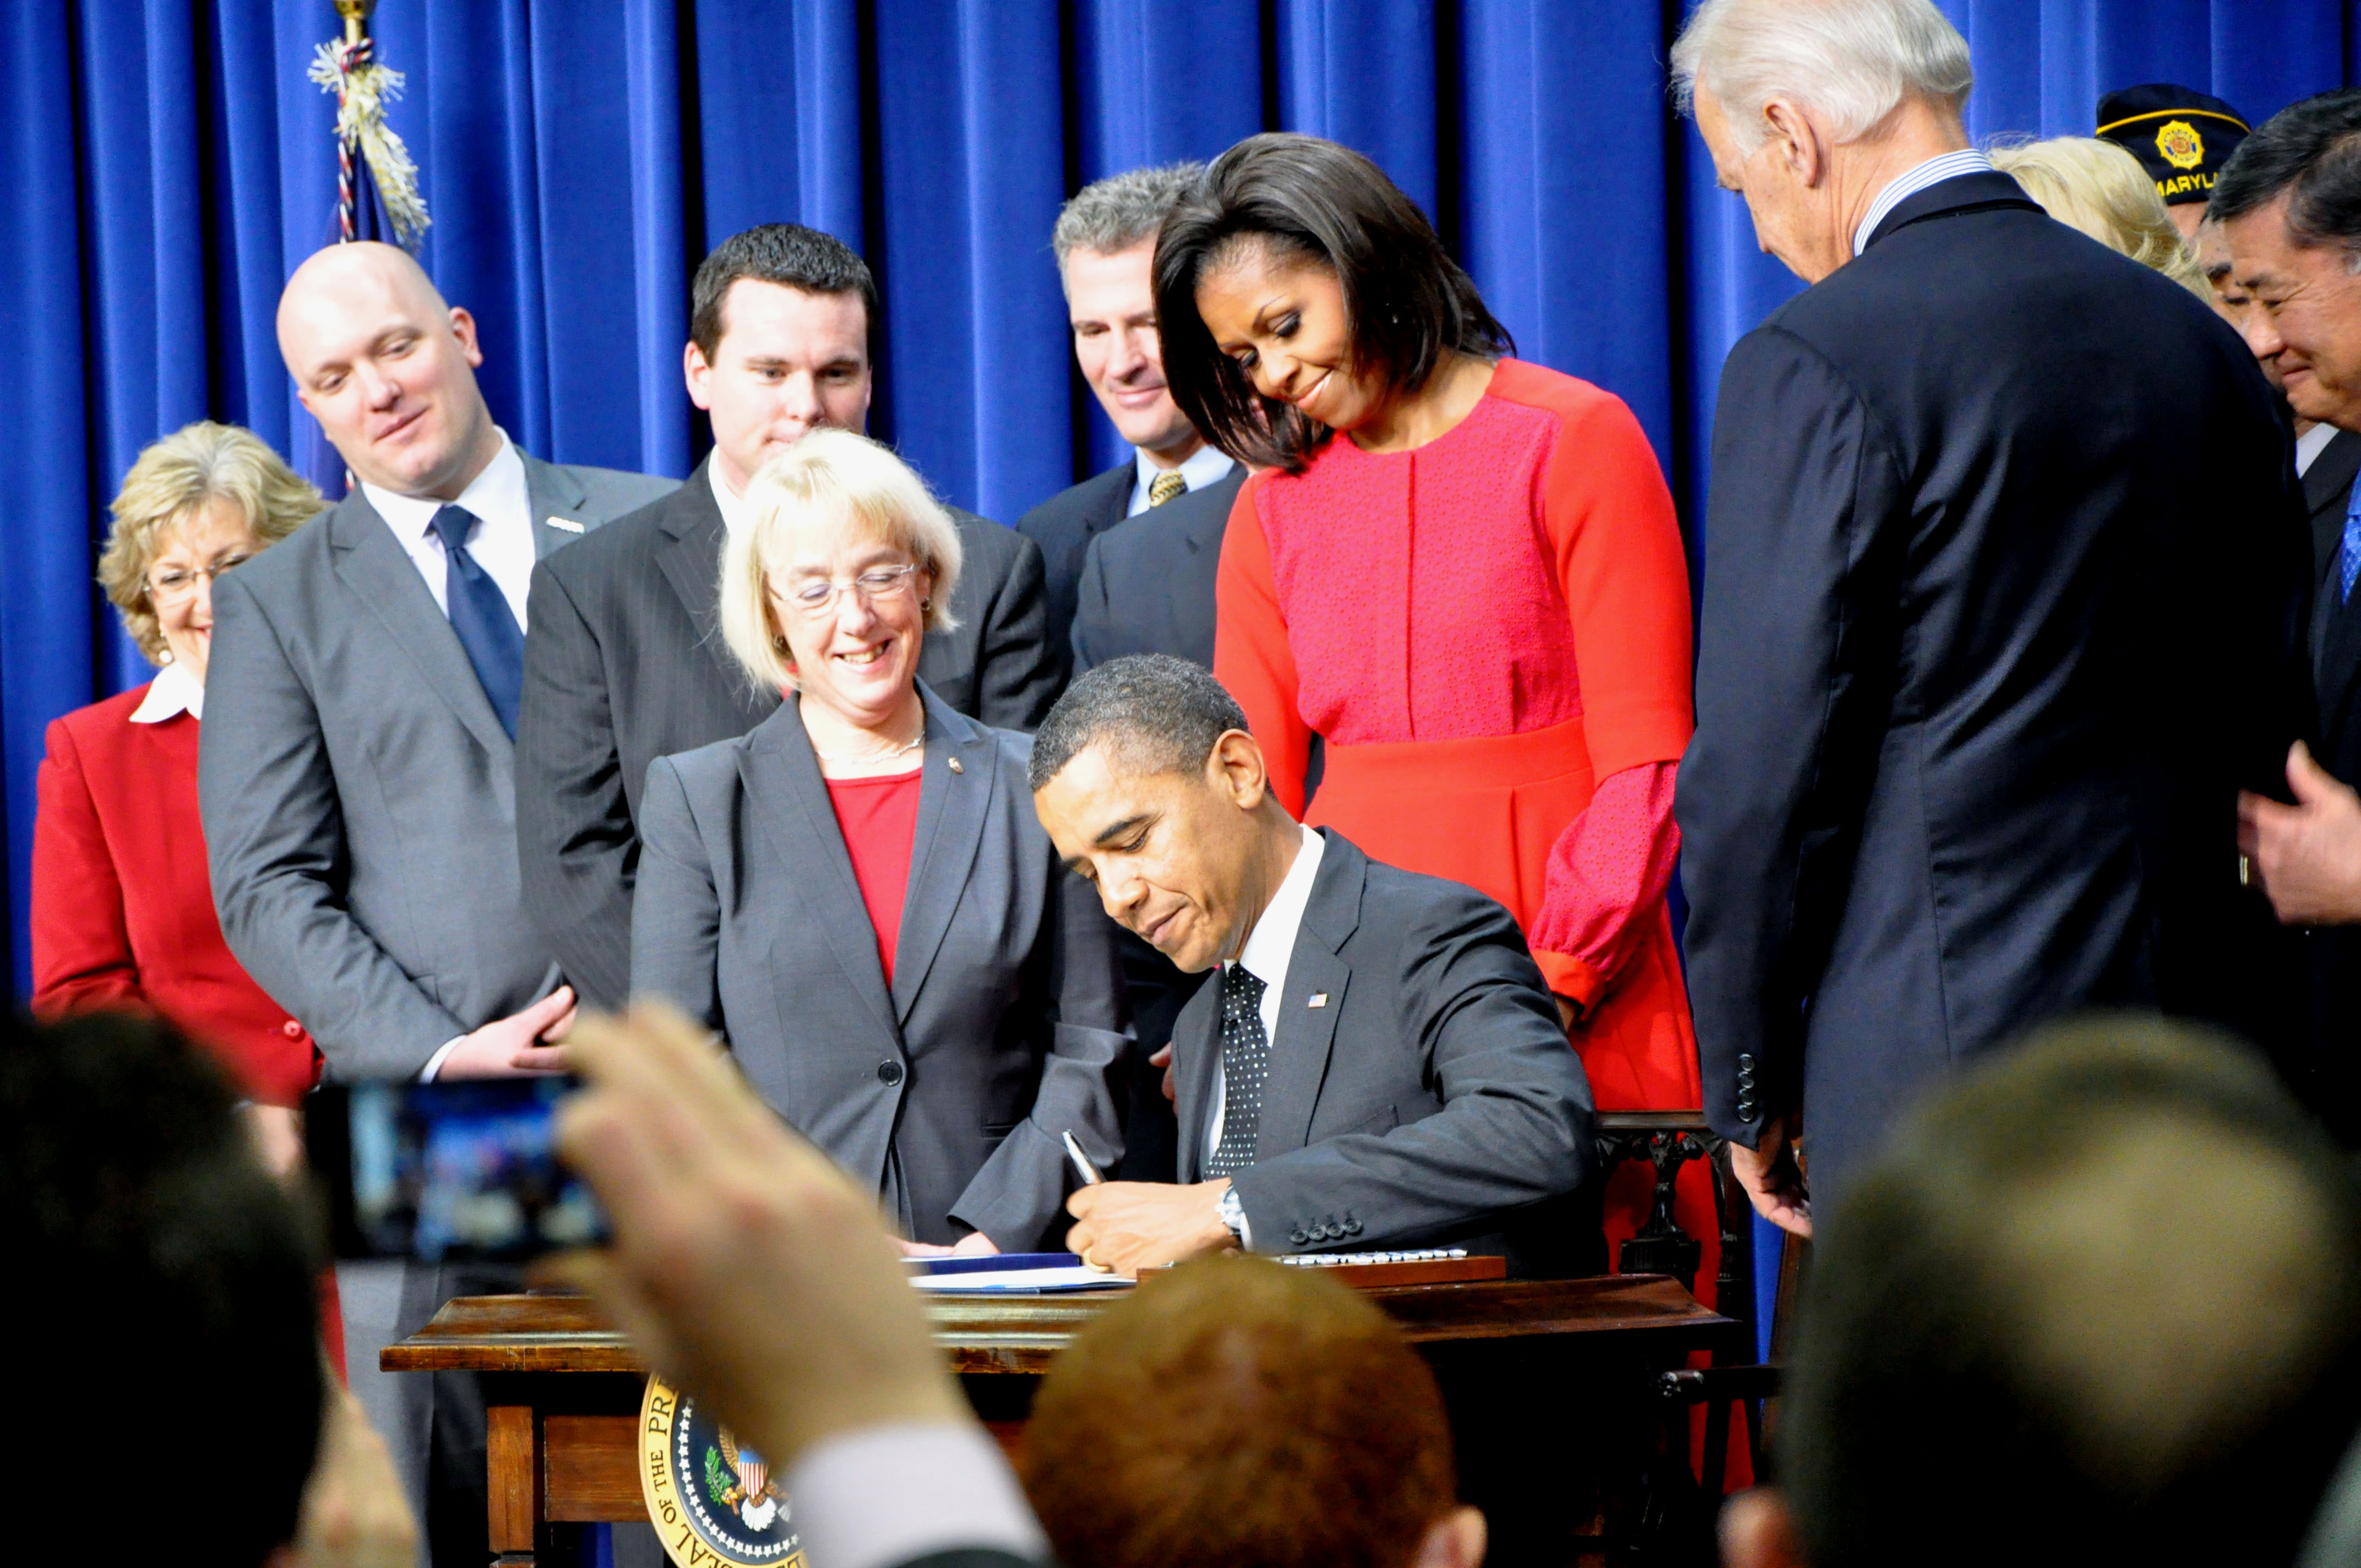 Obama signs law giving tax credits to veterans